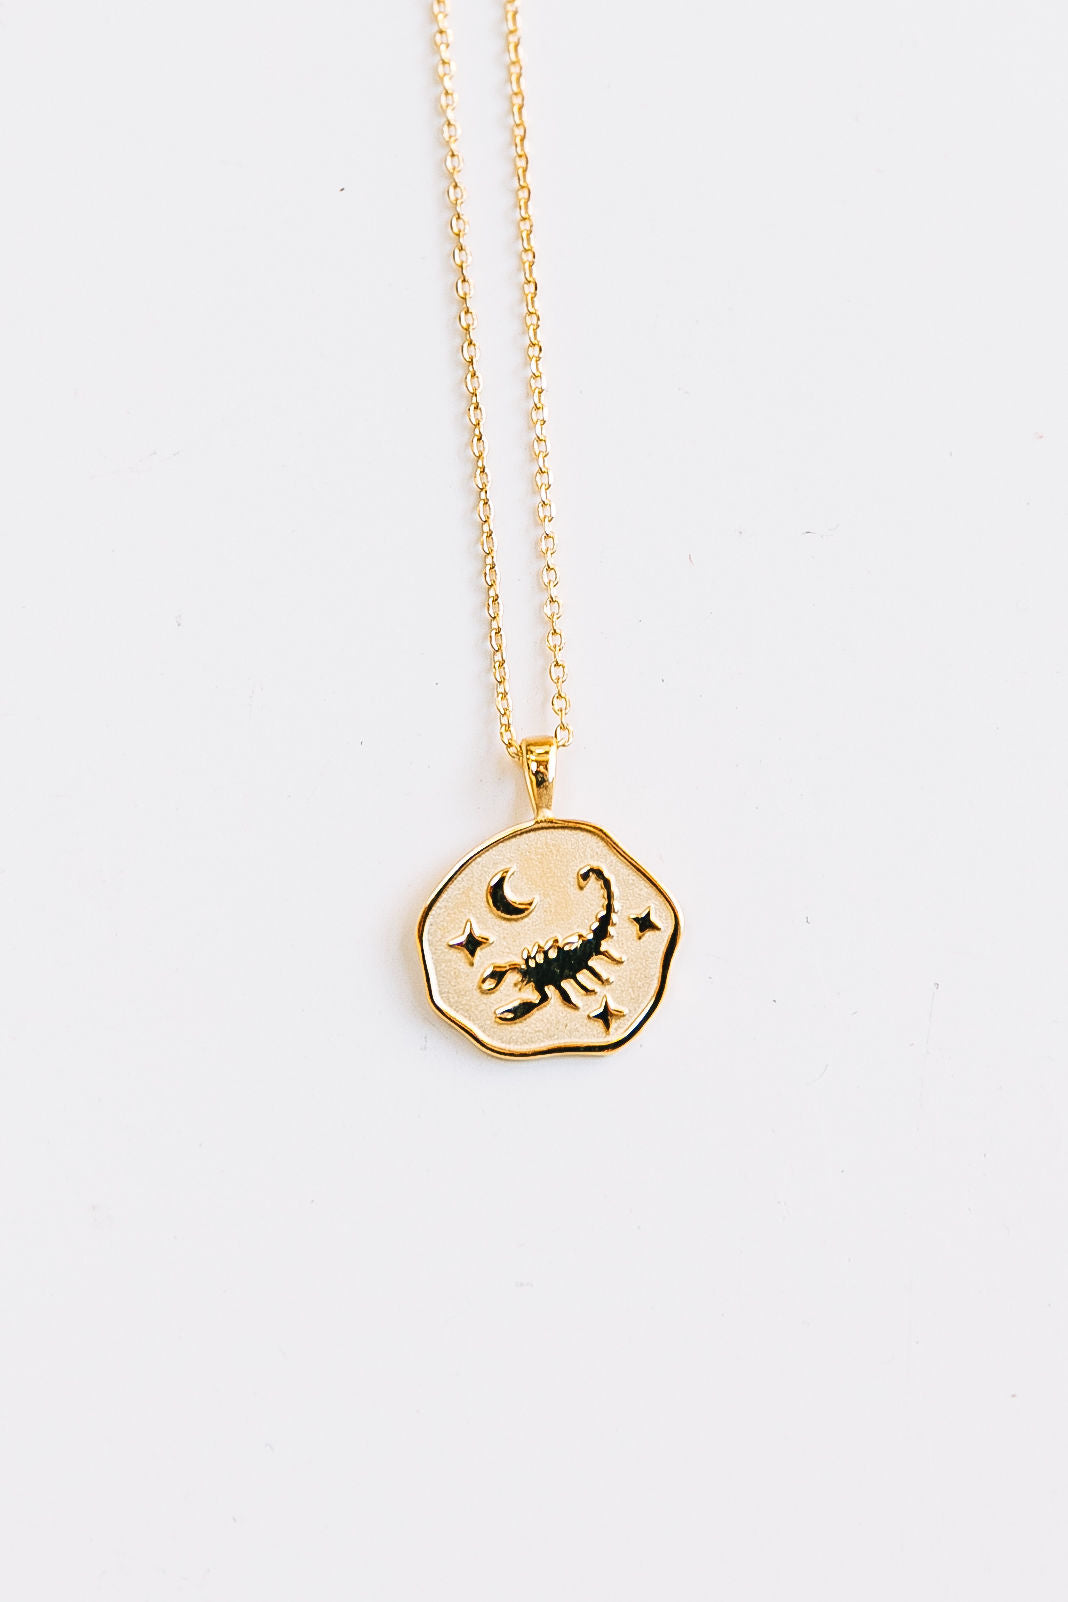 The Abstract Horoscope Necklace